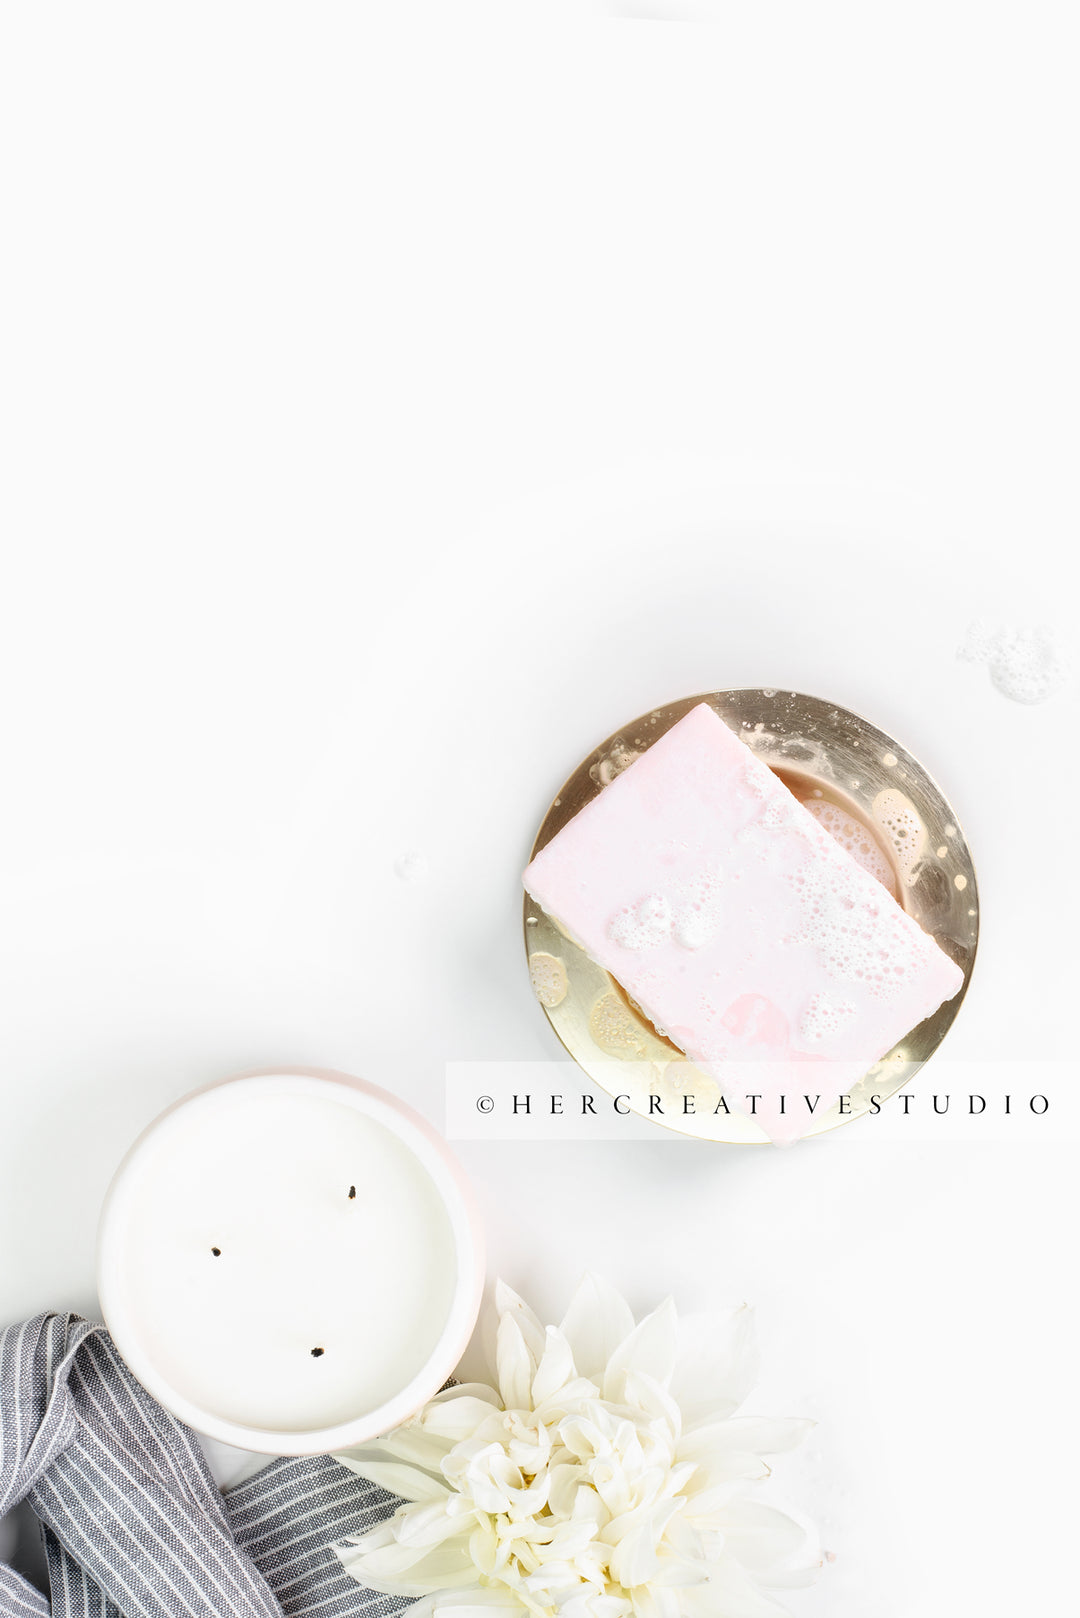 Soap, Candle & Dahlia, Styled Stock